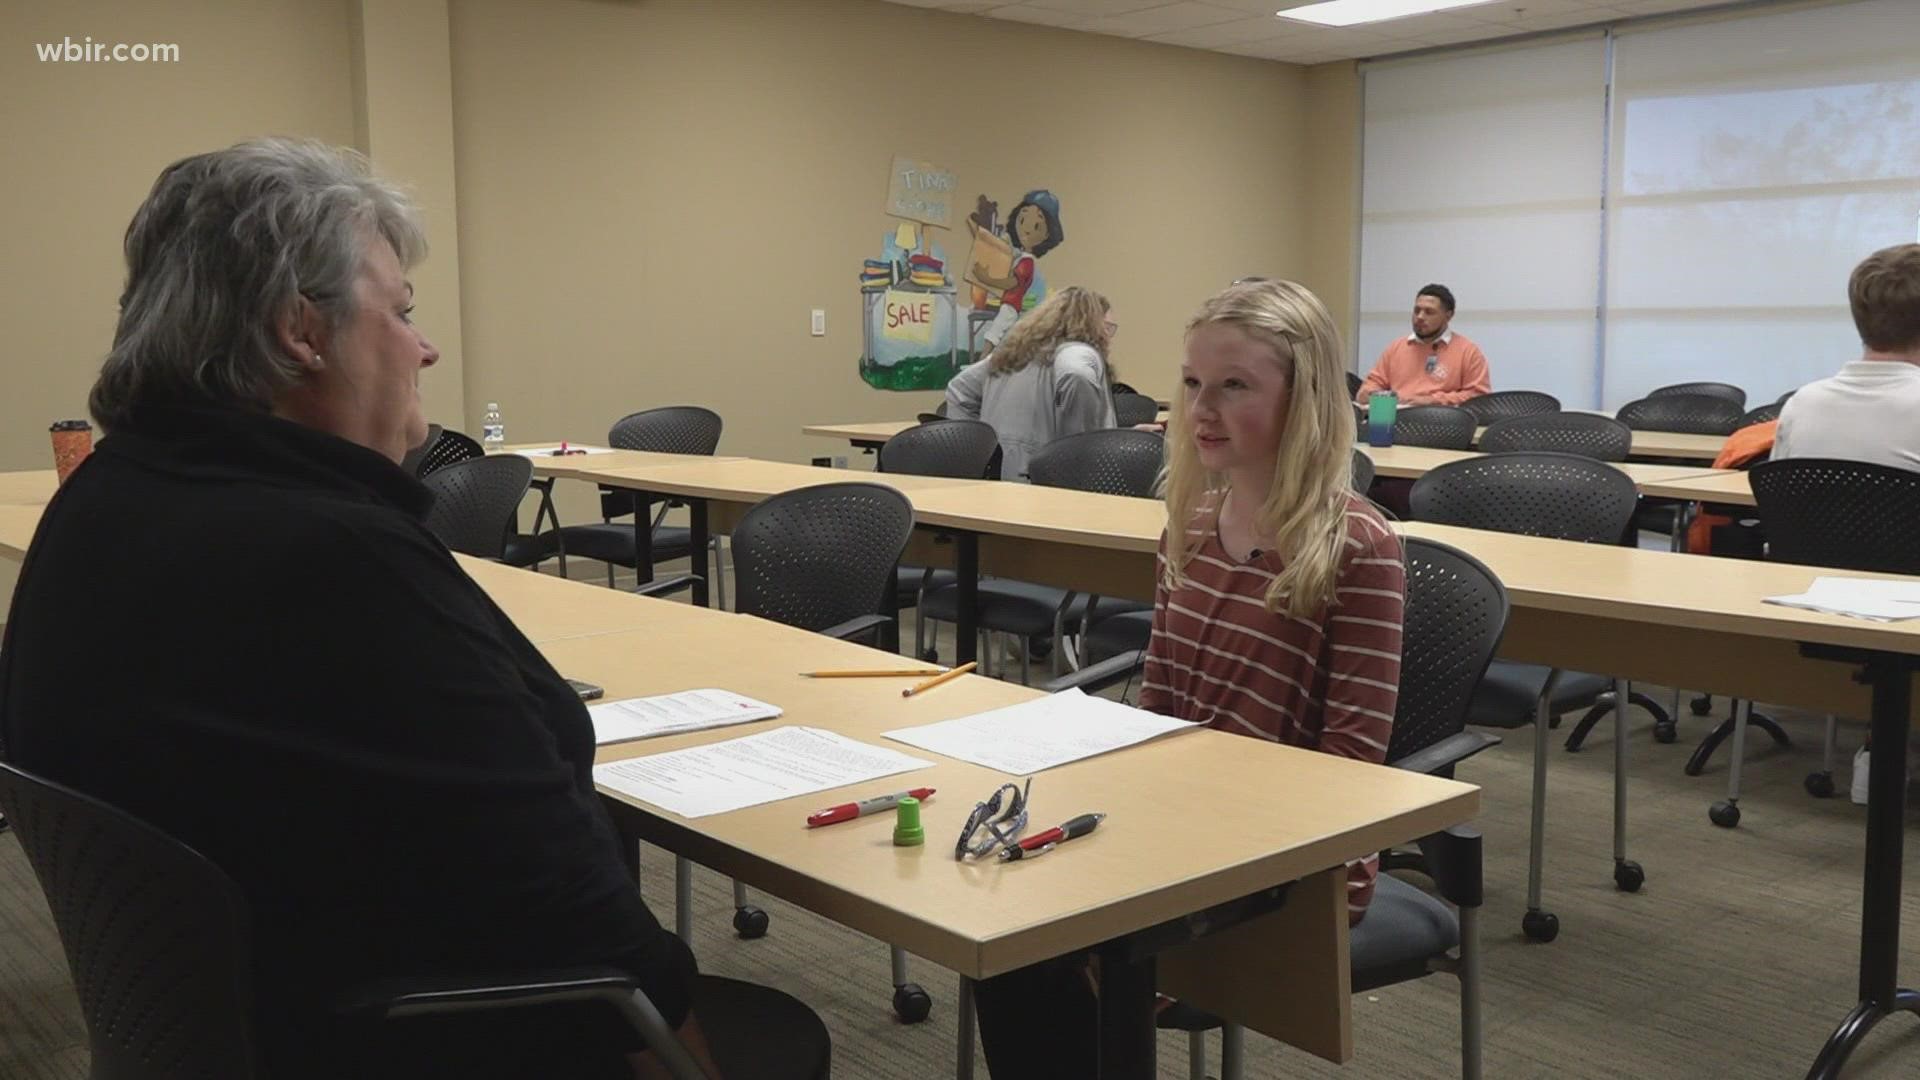 Anderson County leaders said they want young people to start considering their dream job.